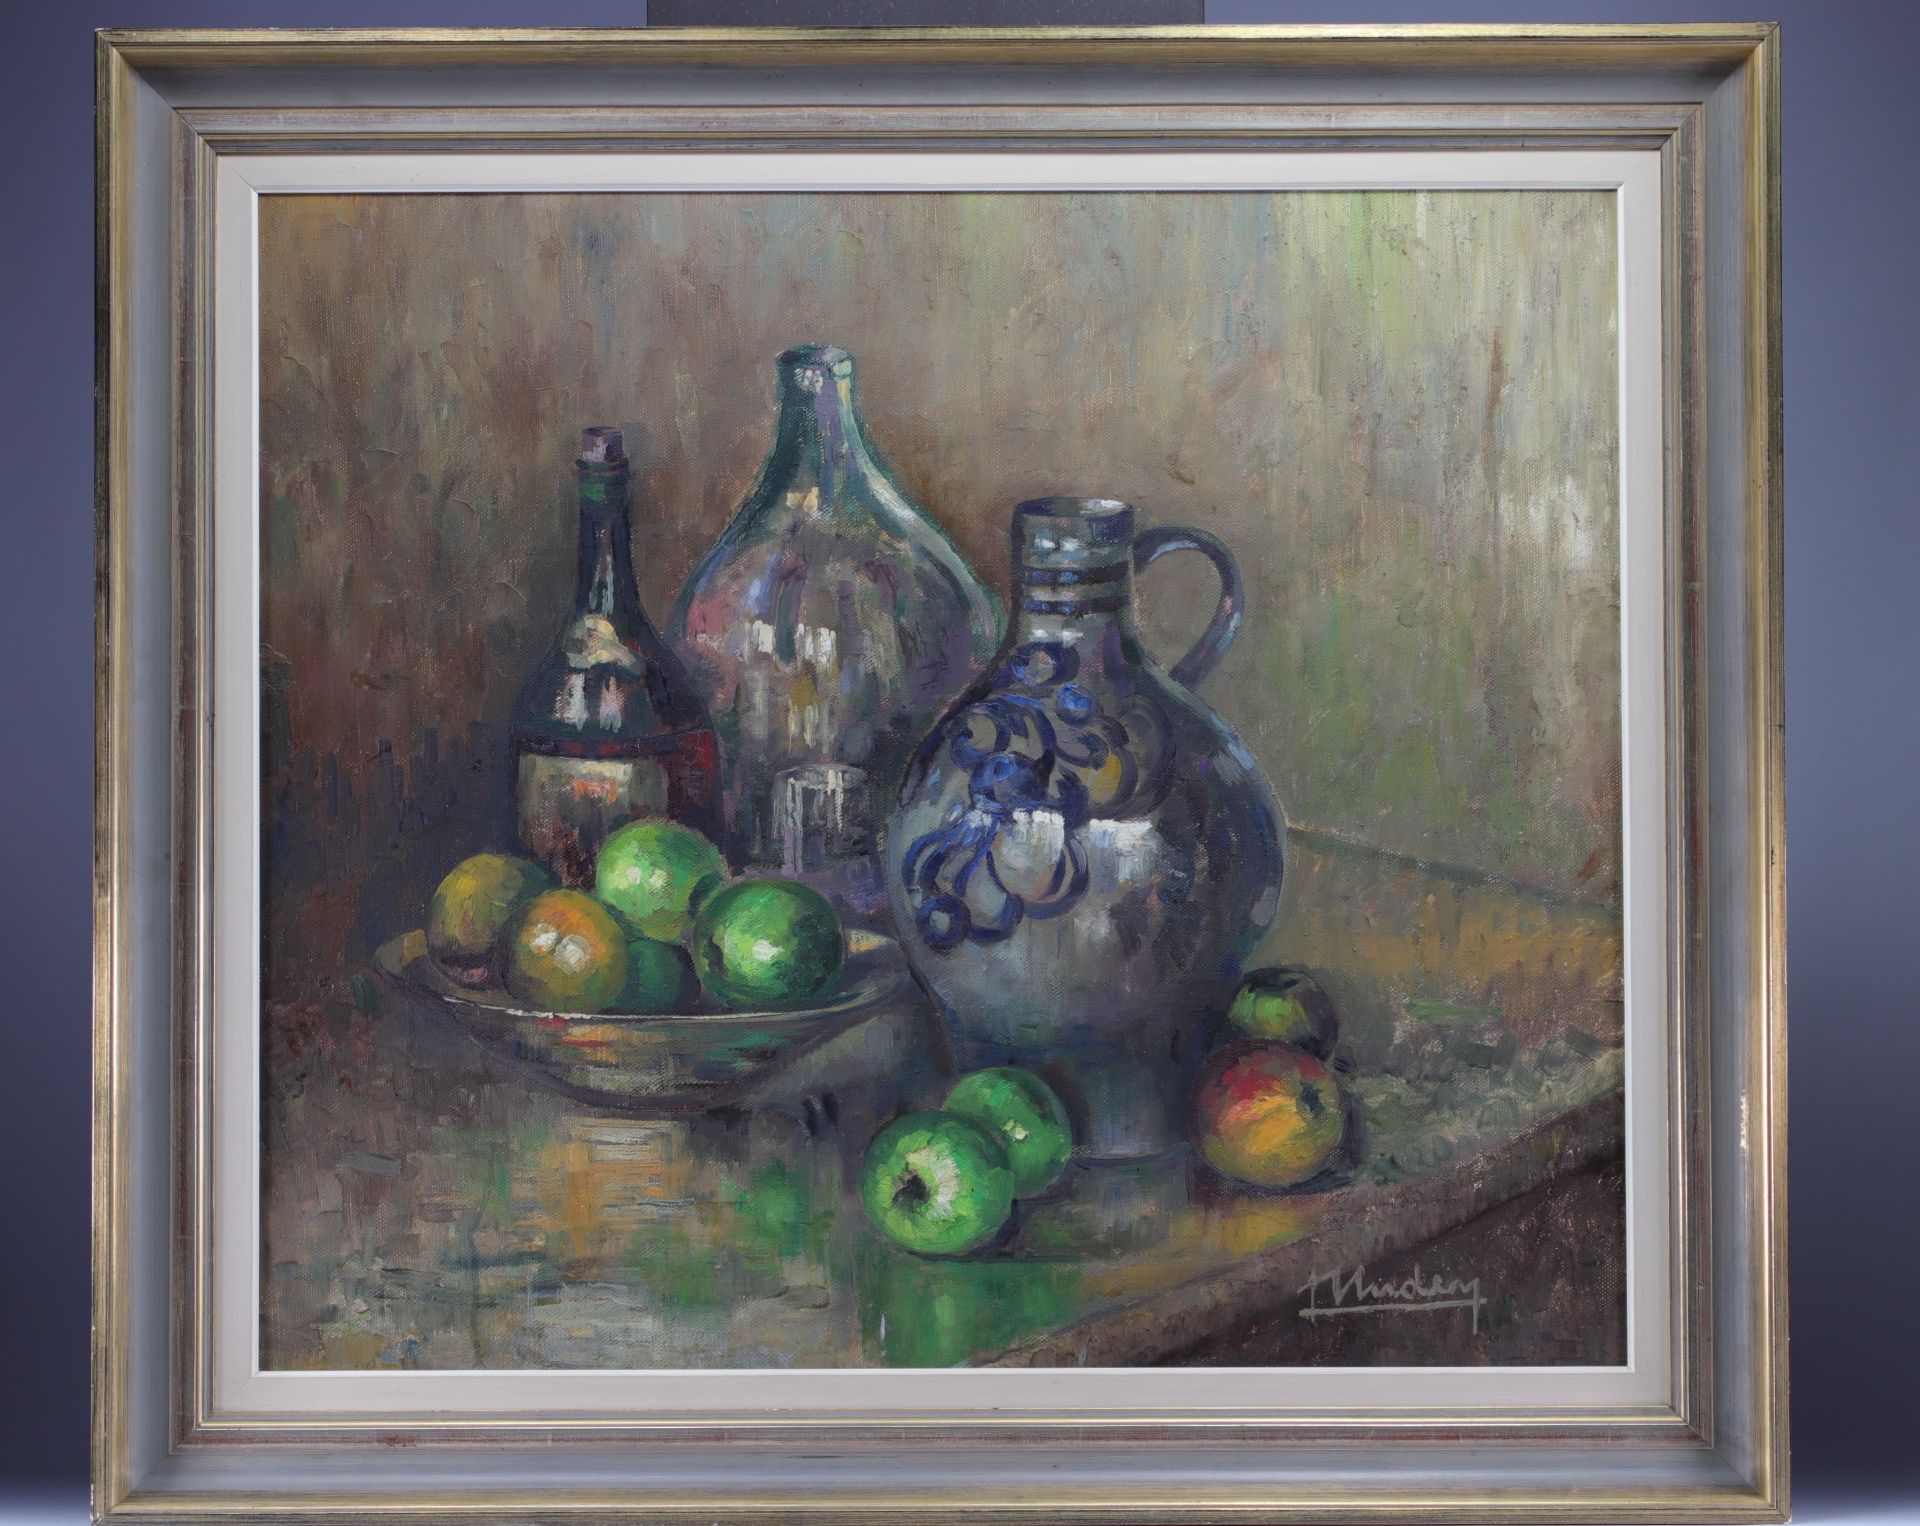 Lily UNDEN (1908-1989) Oil on canvas "Still life" - Image 2 of 2